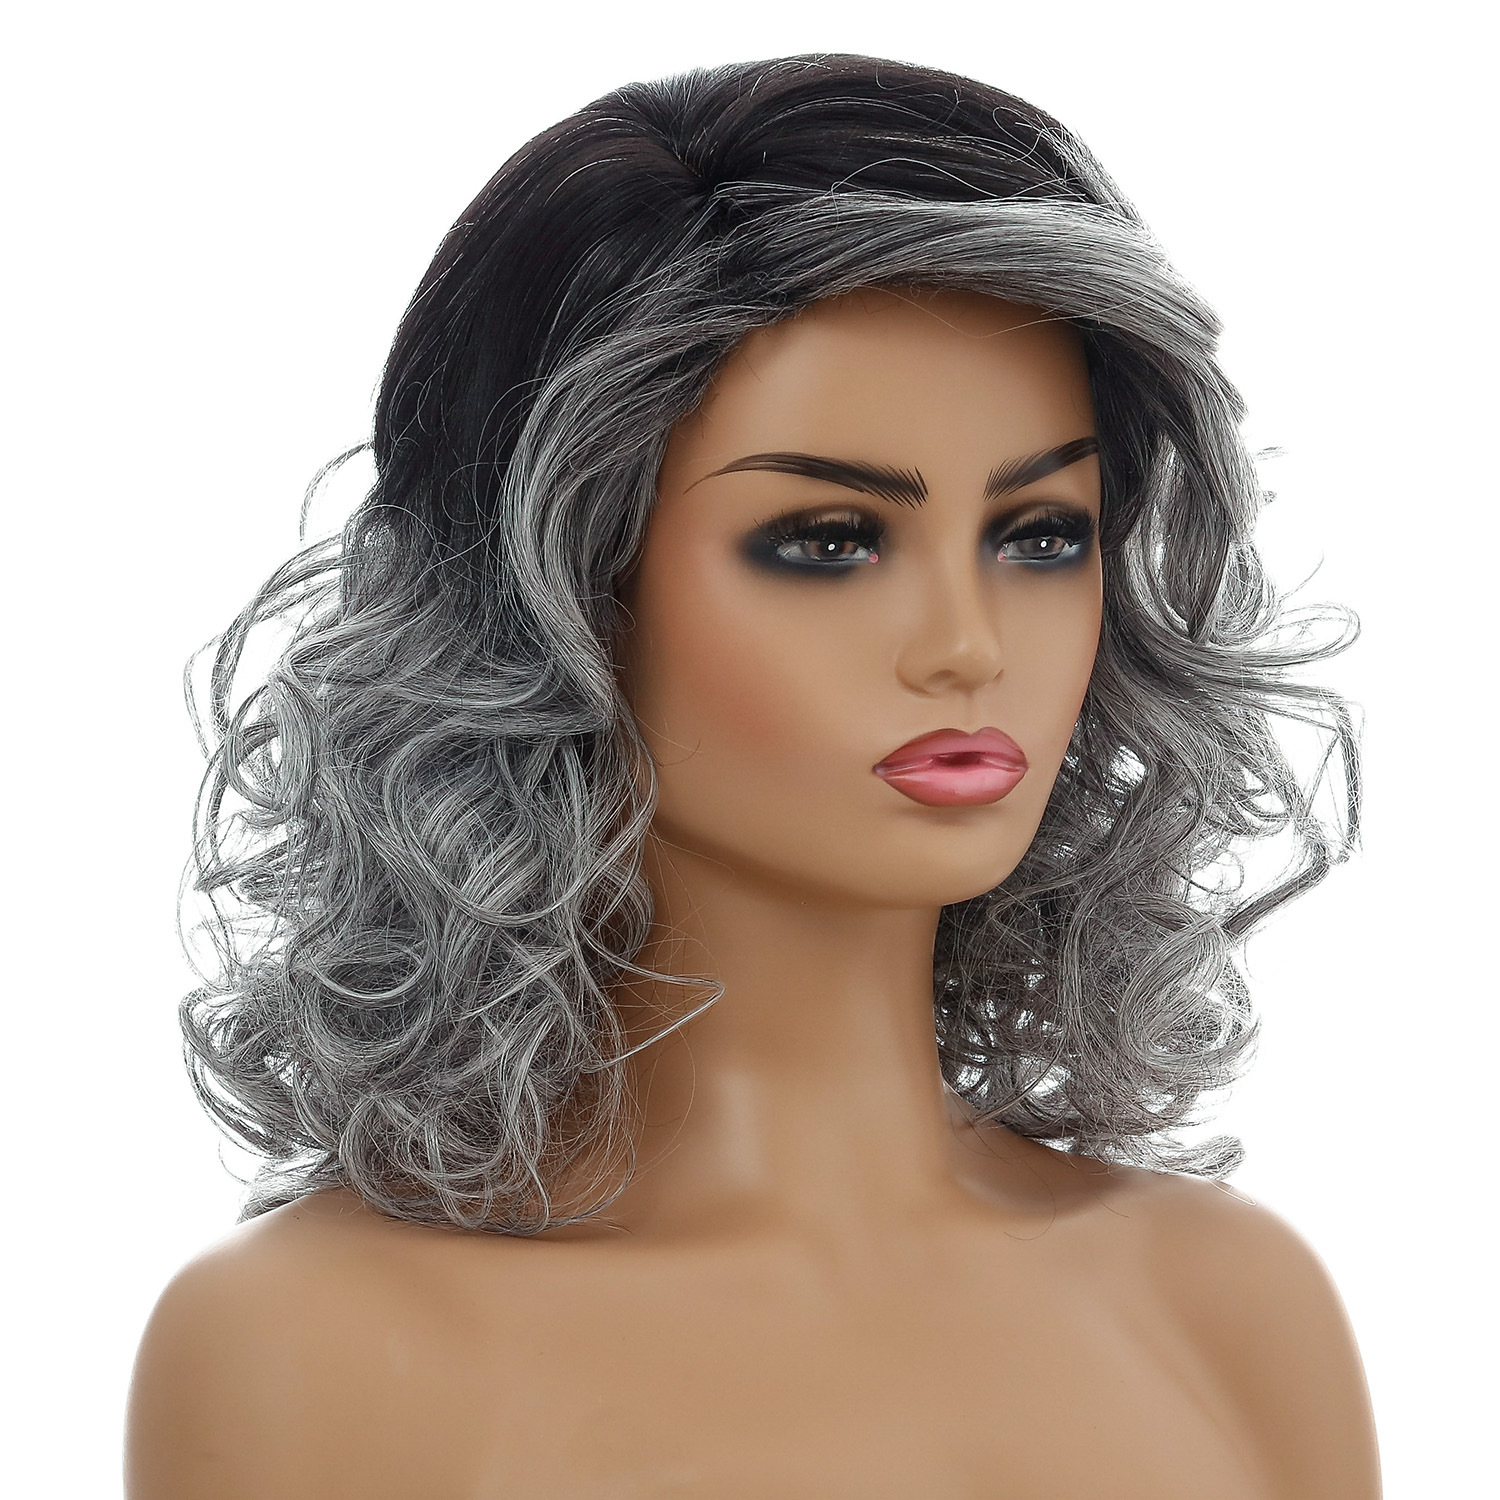 Women's wig in black silver synthetic hair with medium-length curly hair, a classic choice